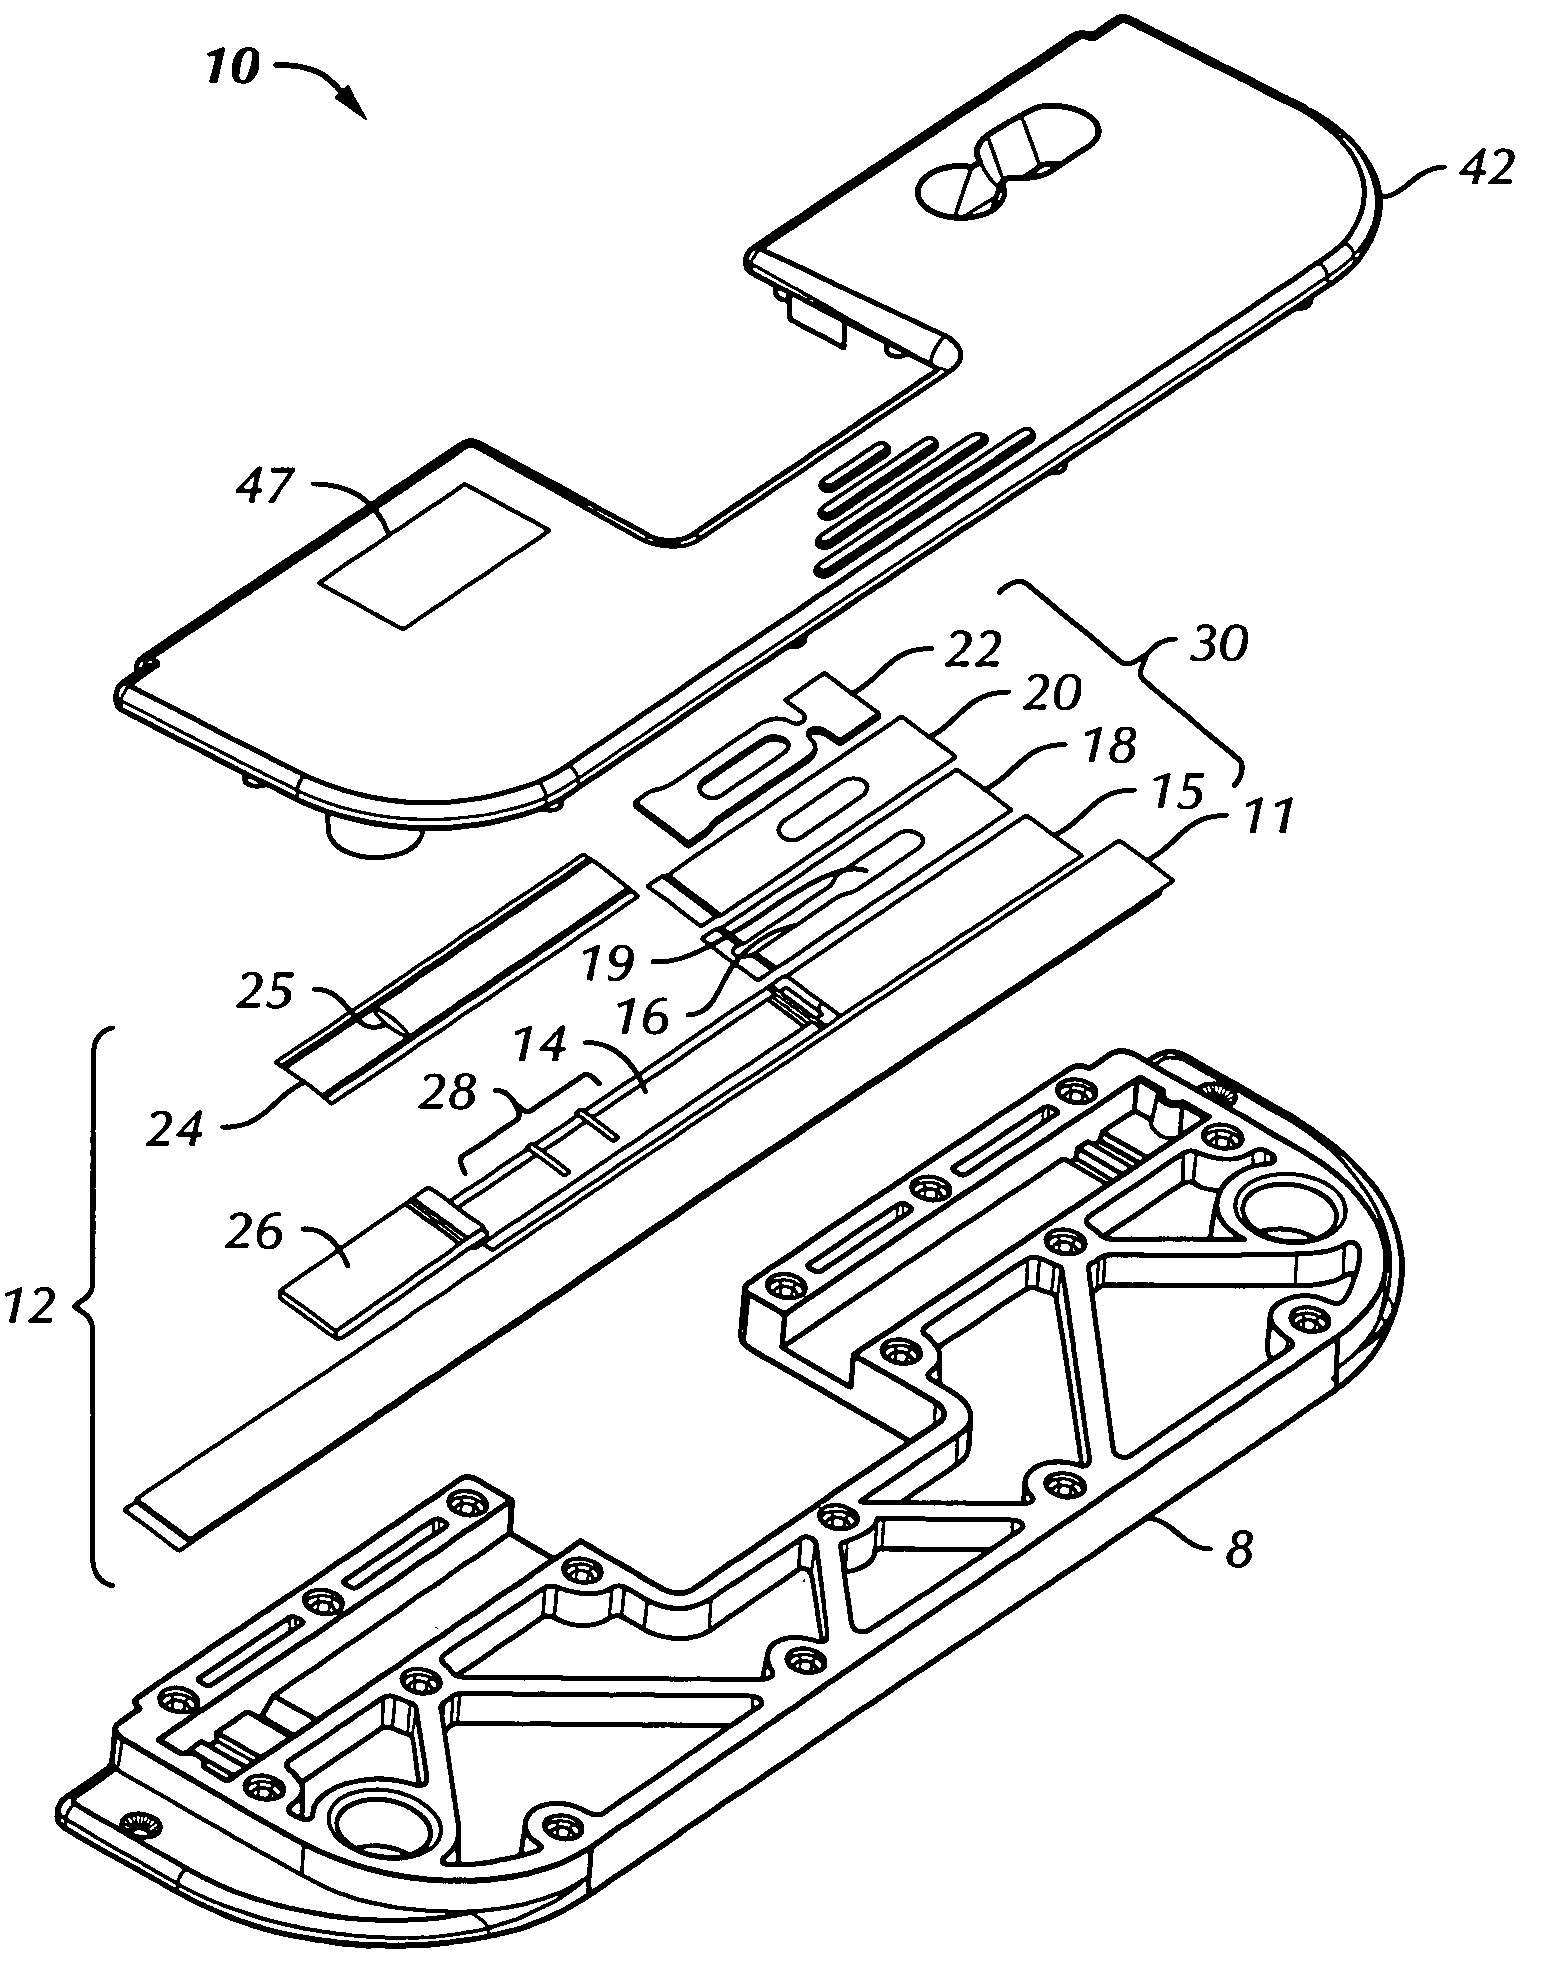 Directed-flow assay device